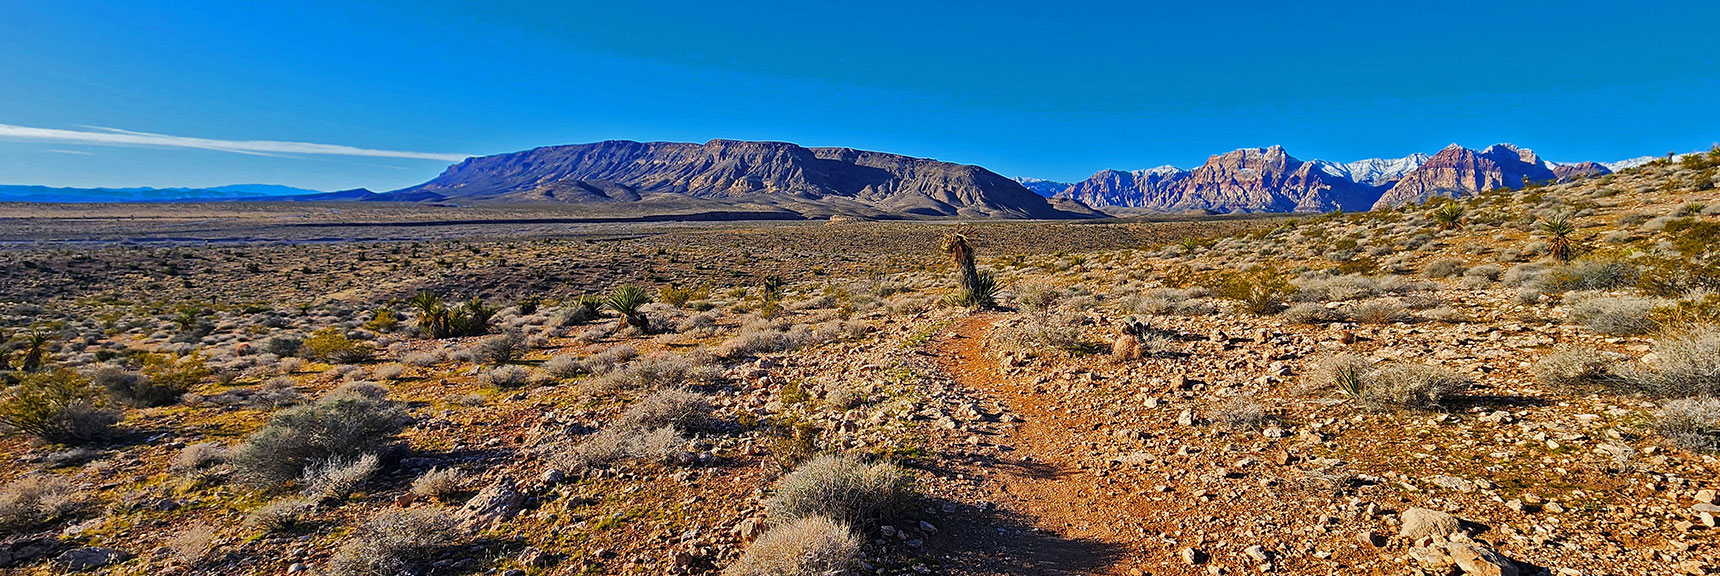 View Back Toward Blue Diamond Hill and Rainbow Mountains. | Brownstone Trail | Calico Basin | Brownstone Basin | La Madre Mountains Wilderness, Nevada